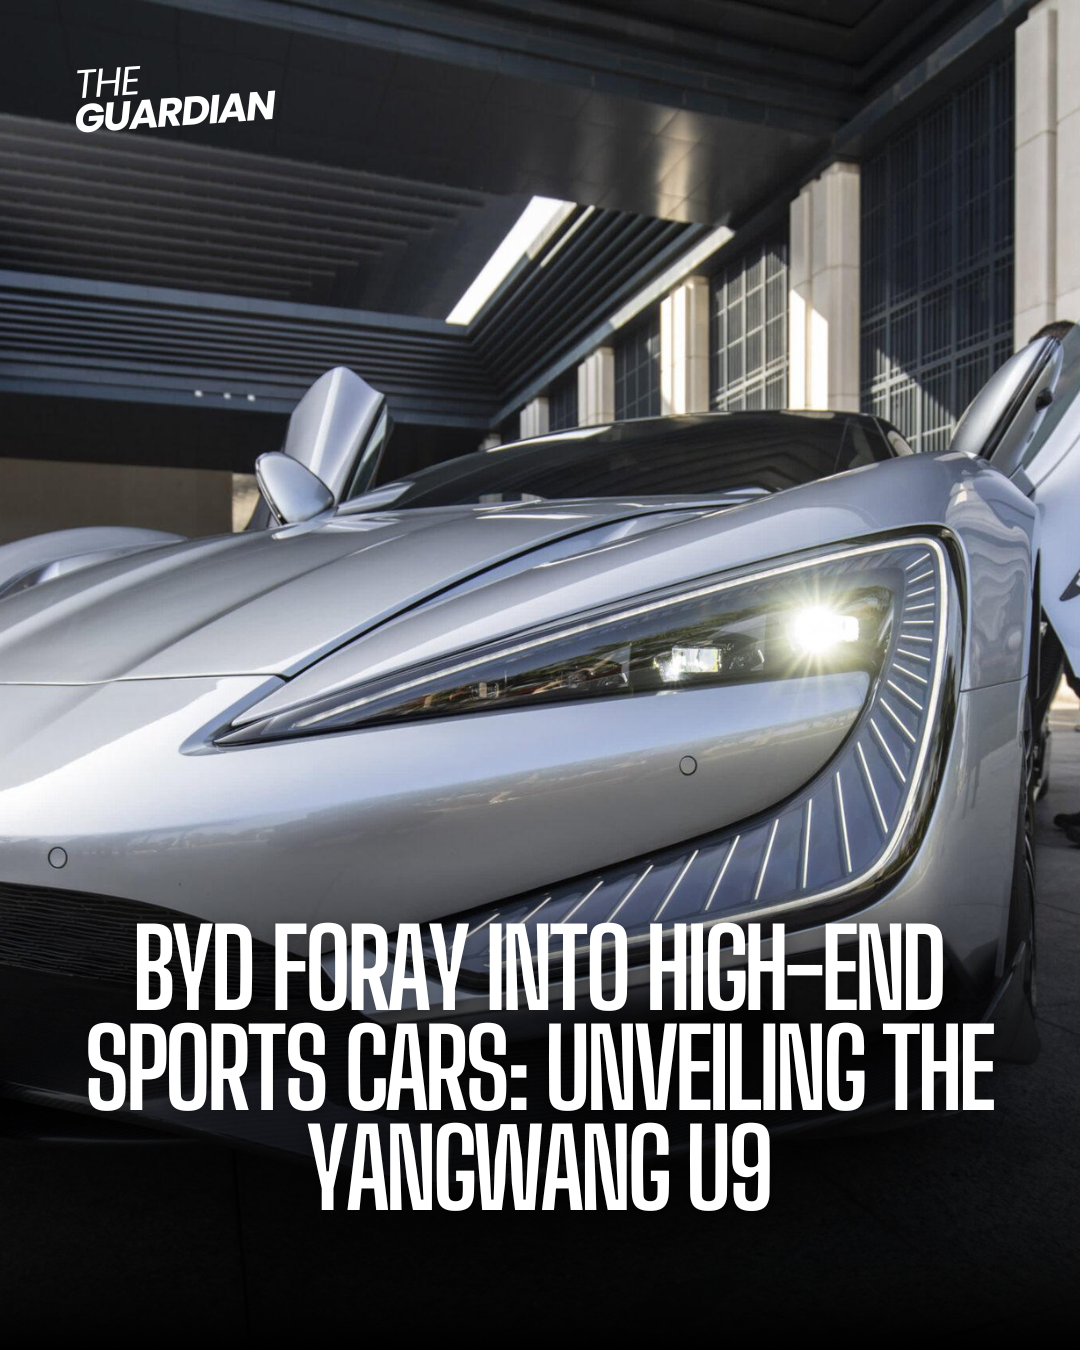 BYD, the Chinese electric vehicle manufacturer, has launched the Yangwang U9, a high-end sports car.